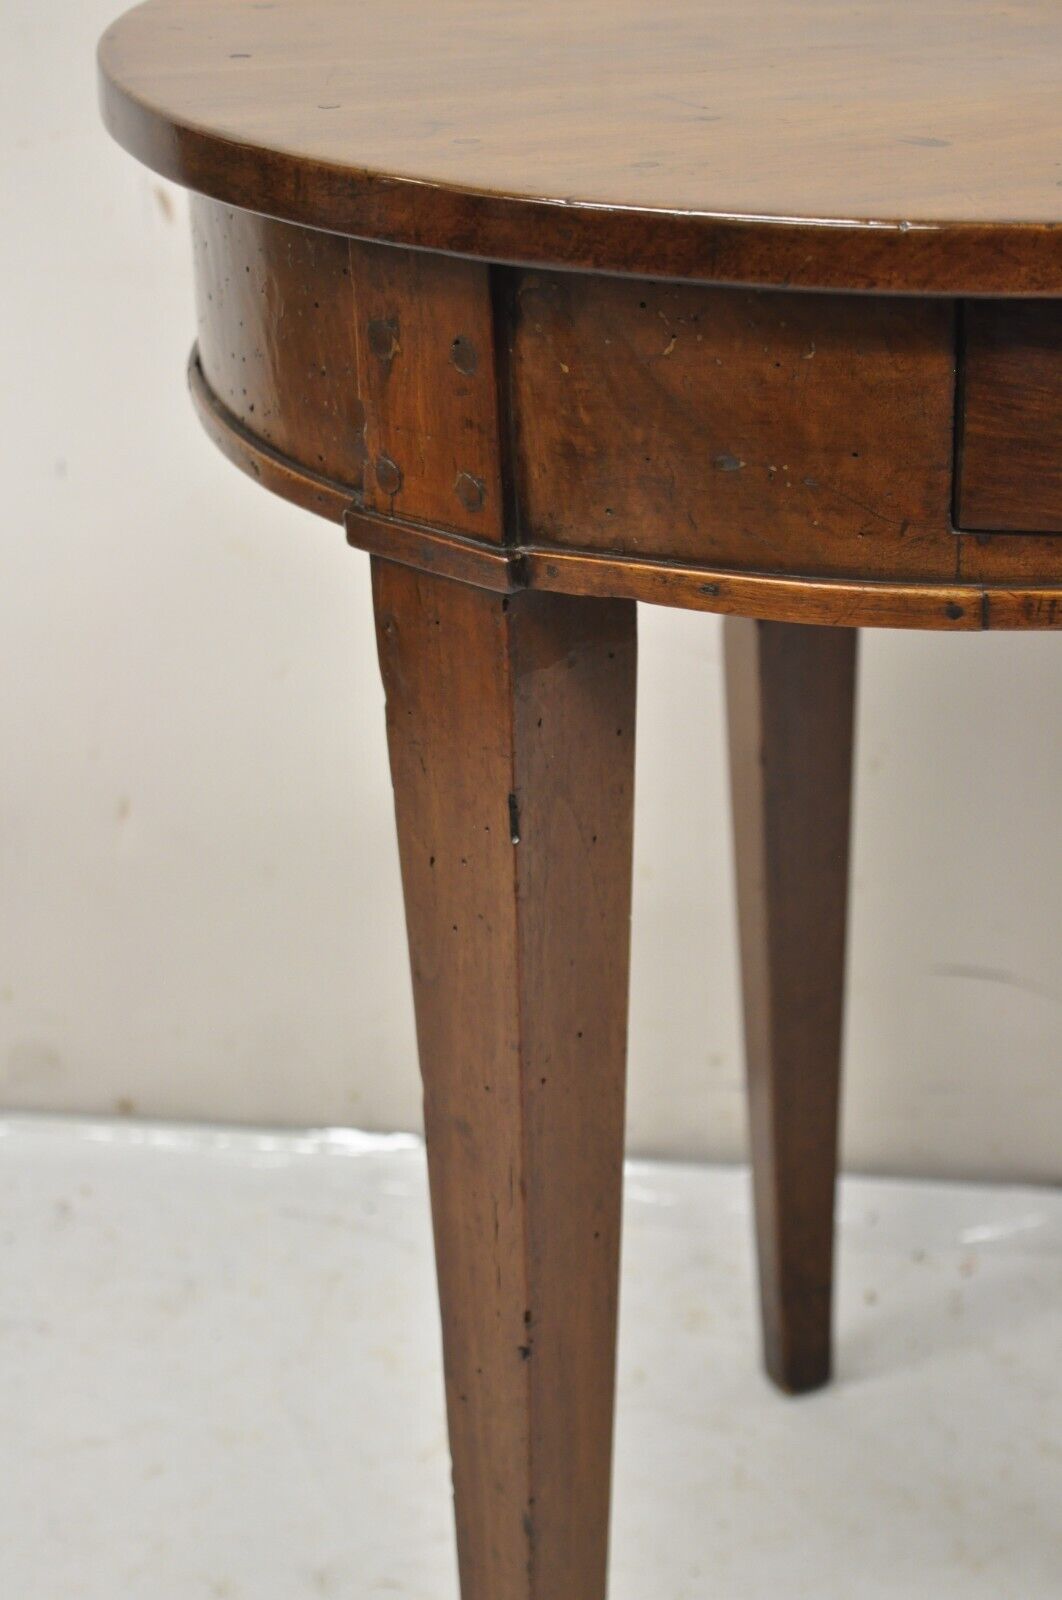 Antique Italian Biedermeier Country Provincial Cherry 1 Drawer Round Side Table